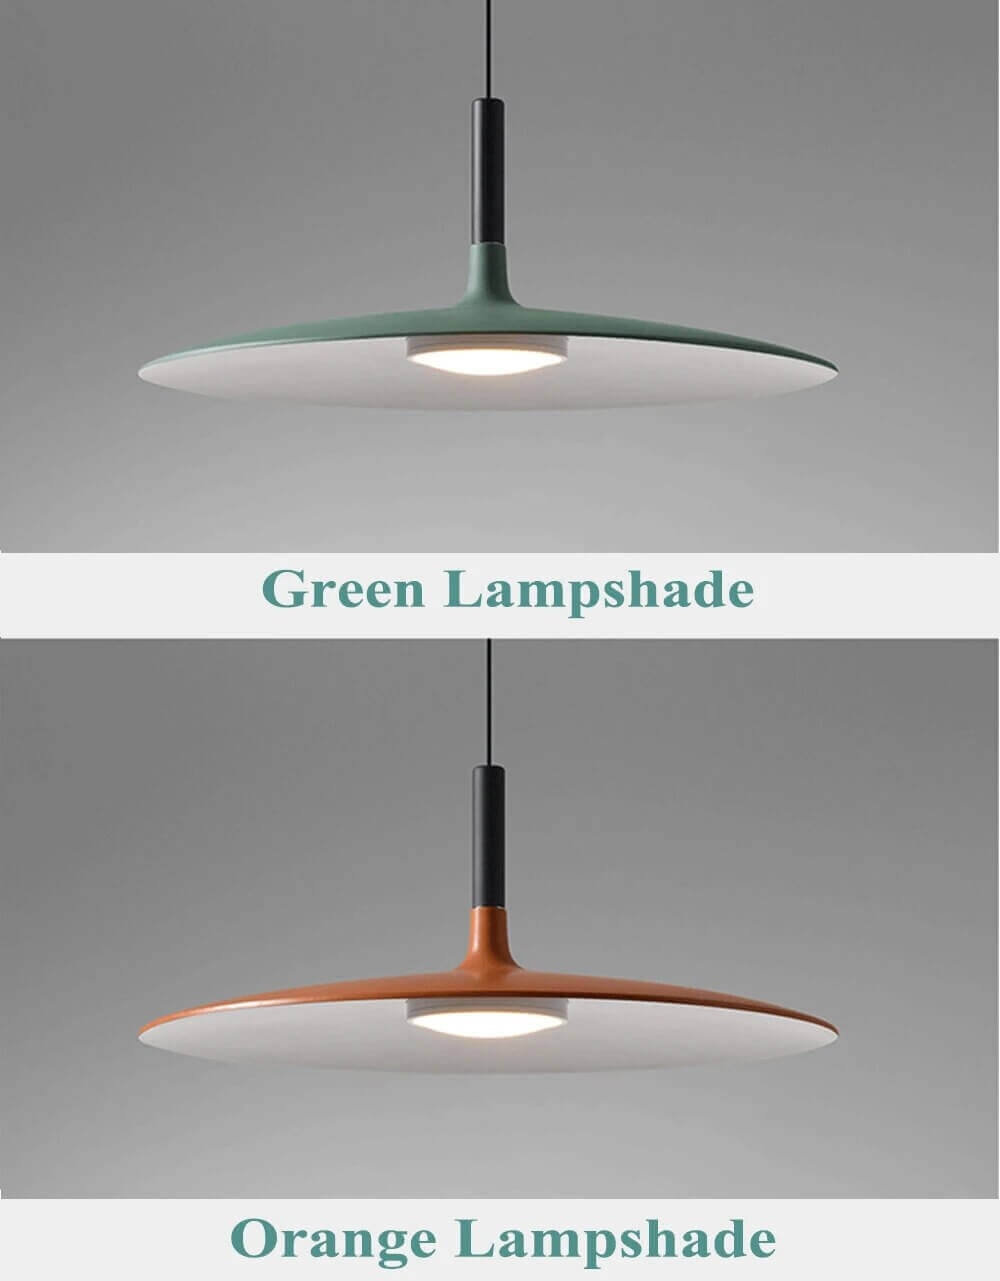 Add Modern Flair with Sleek Pendant Lamps | Available in 4 variants.